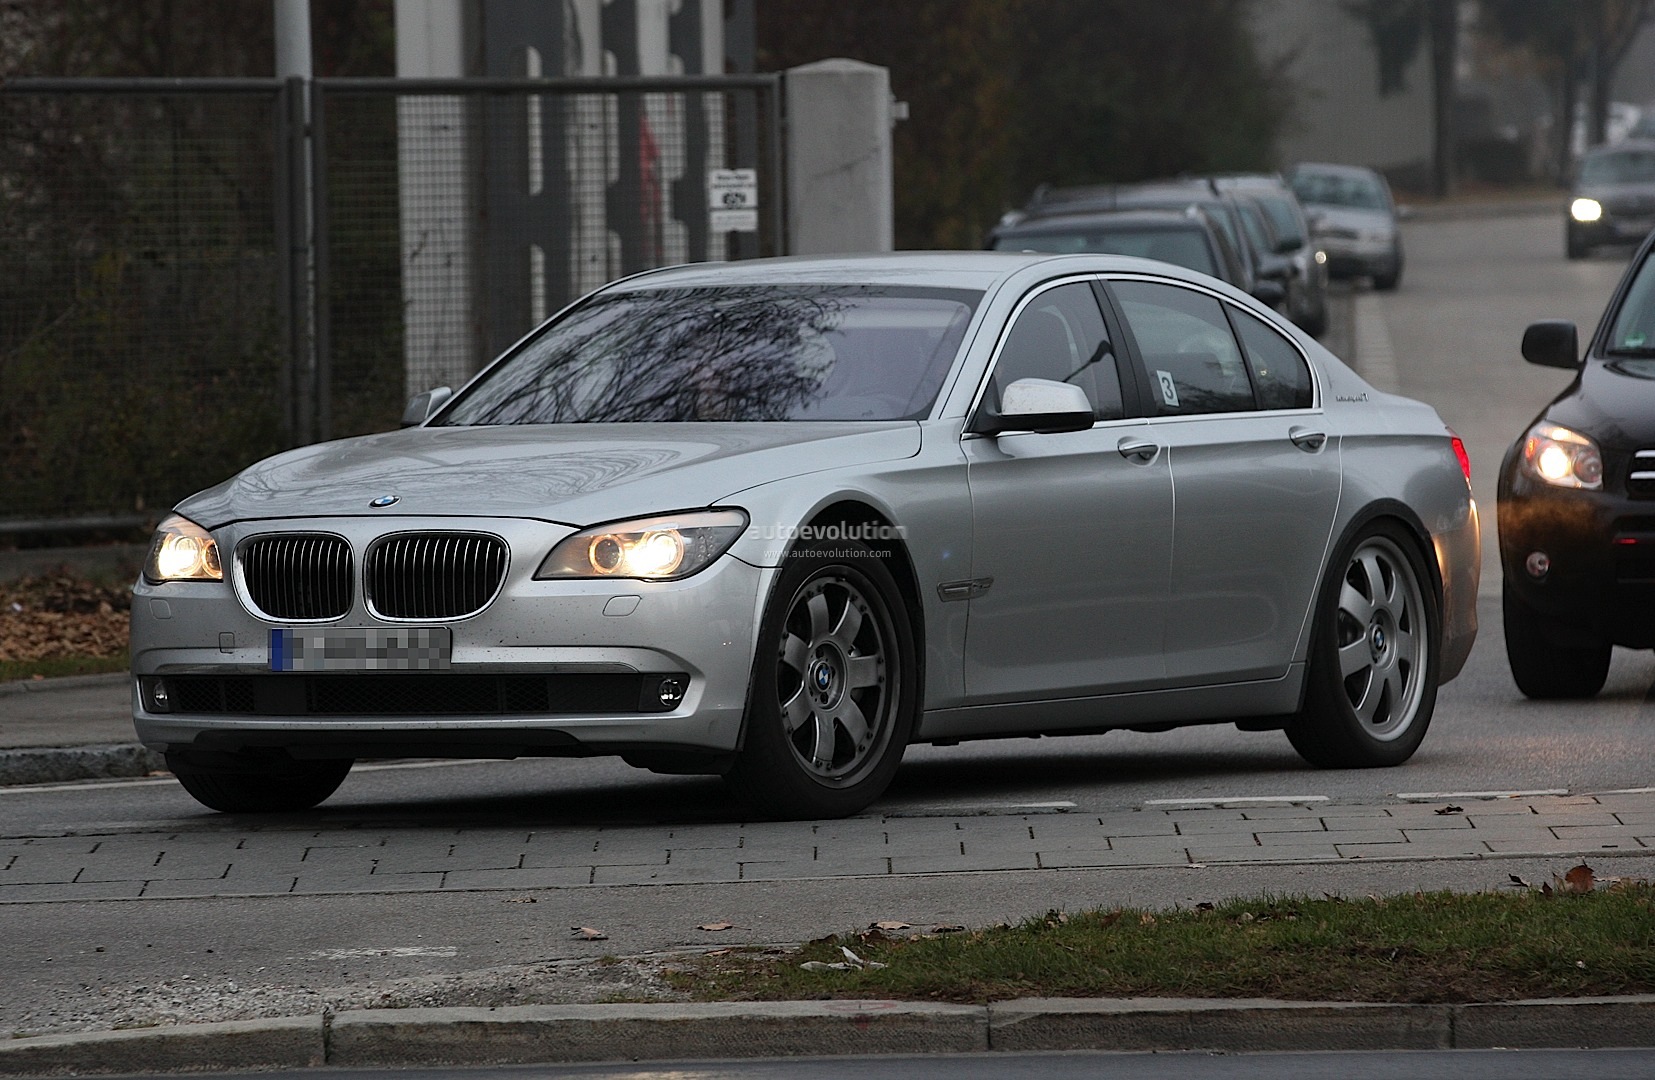 BMW 7 Series may join the i Range